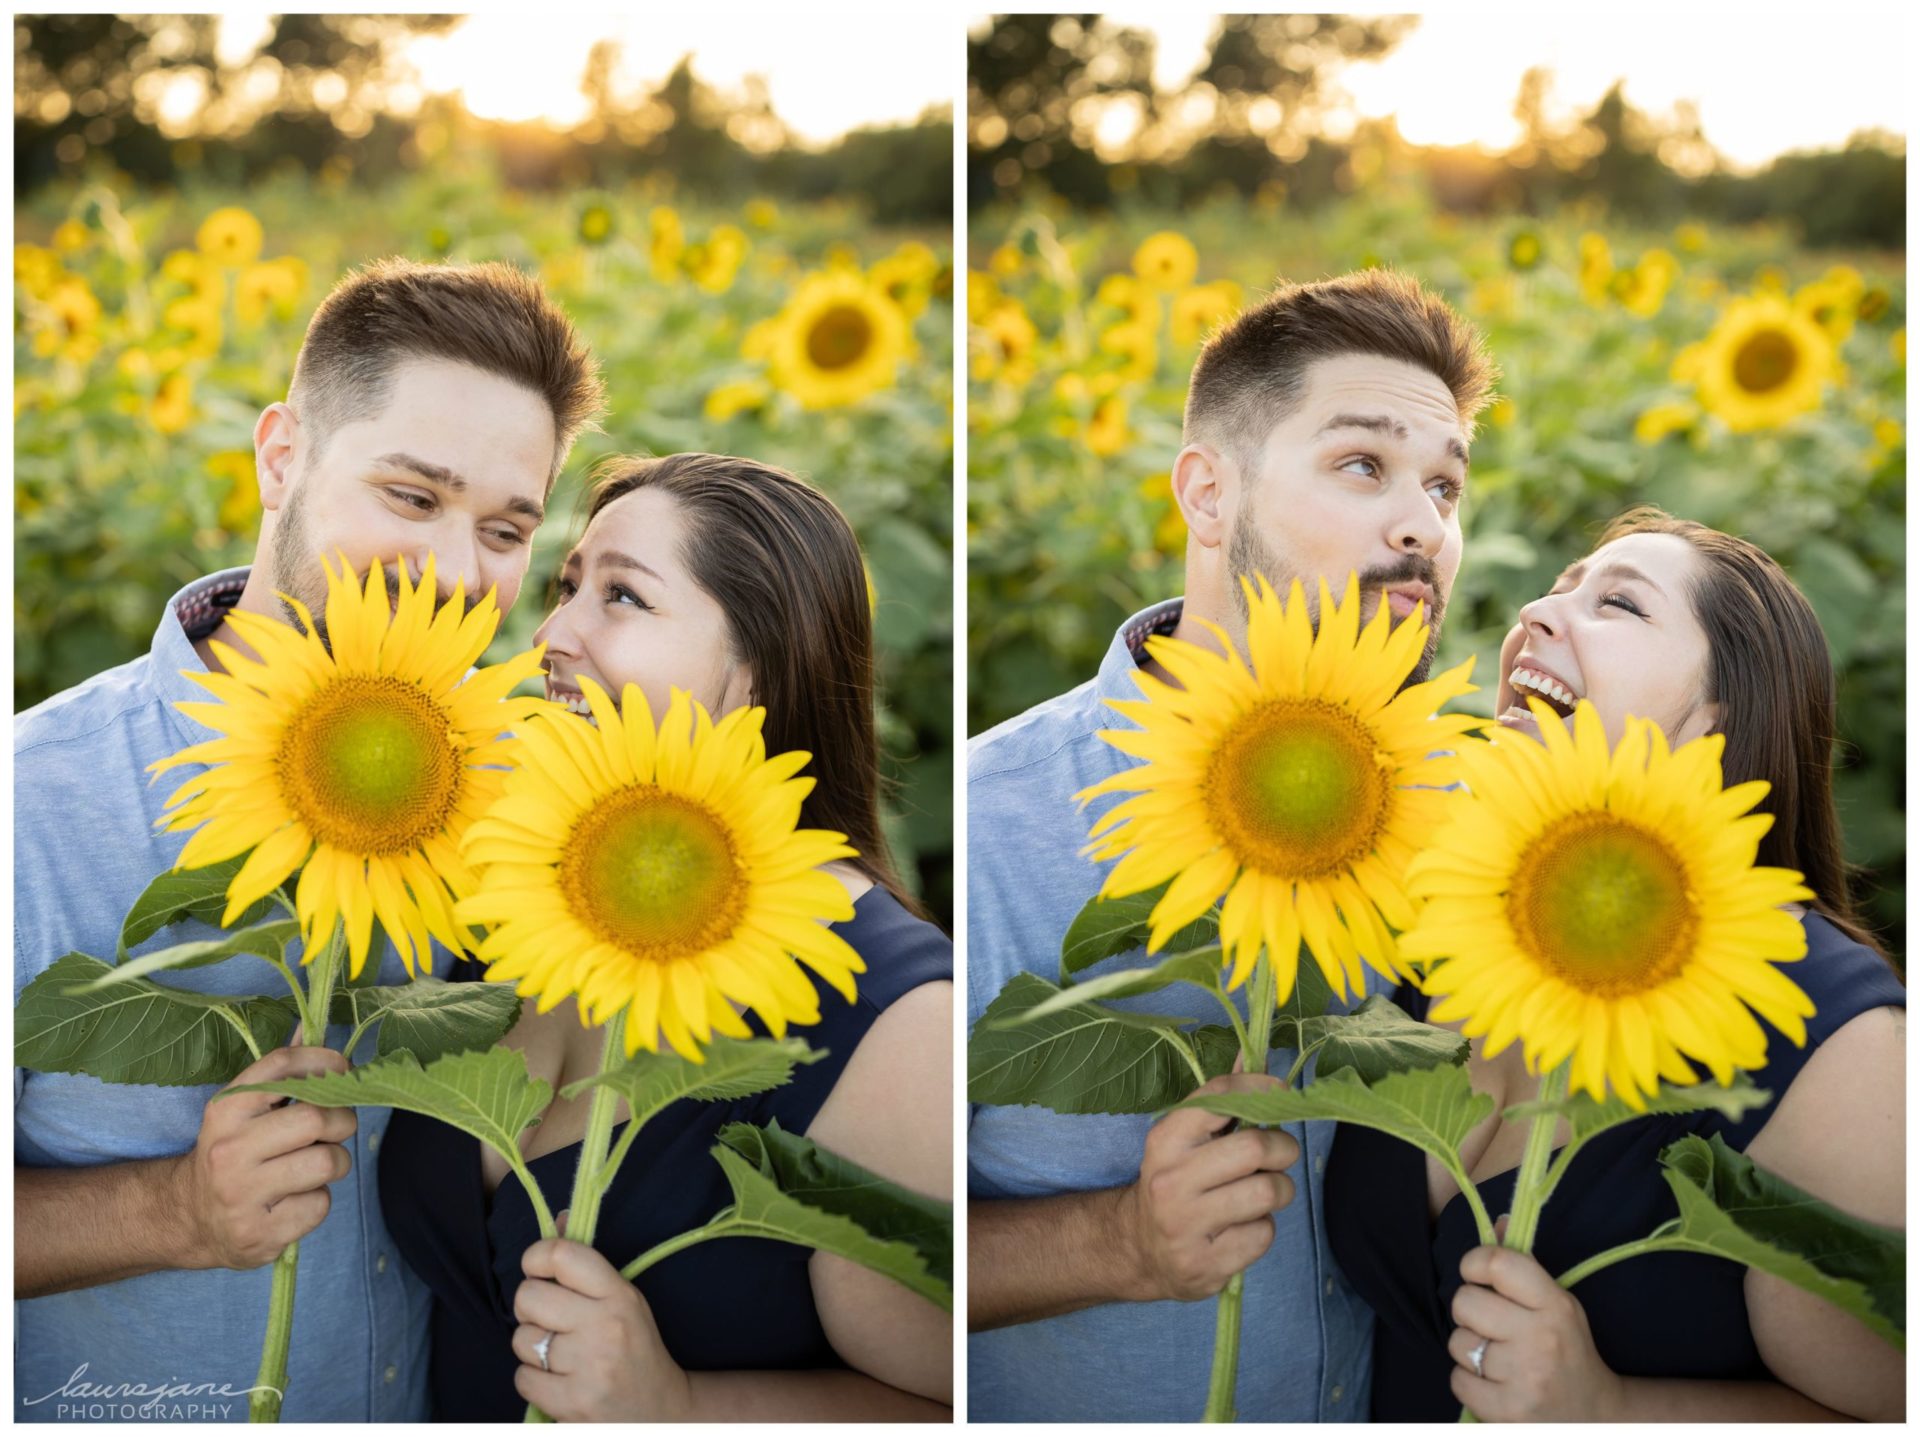 Quirky Engagement Photos with Sunflowers